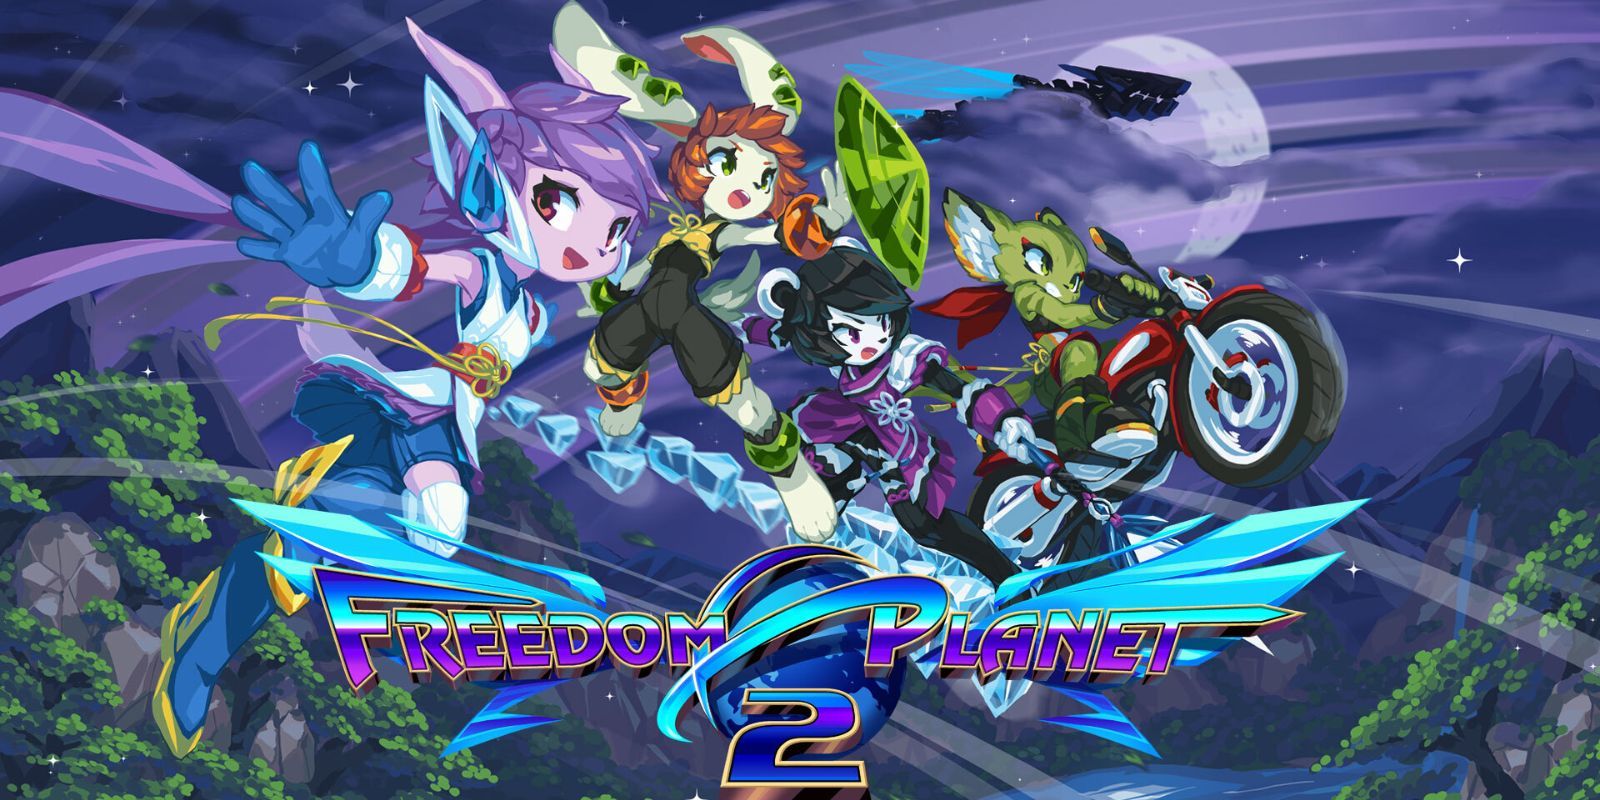 Freedom Planet 2 logo and cover image with four playable characters